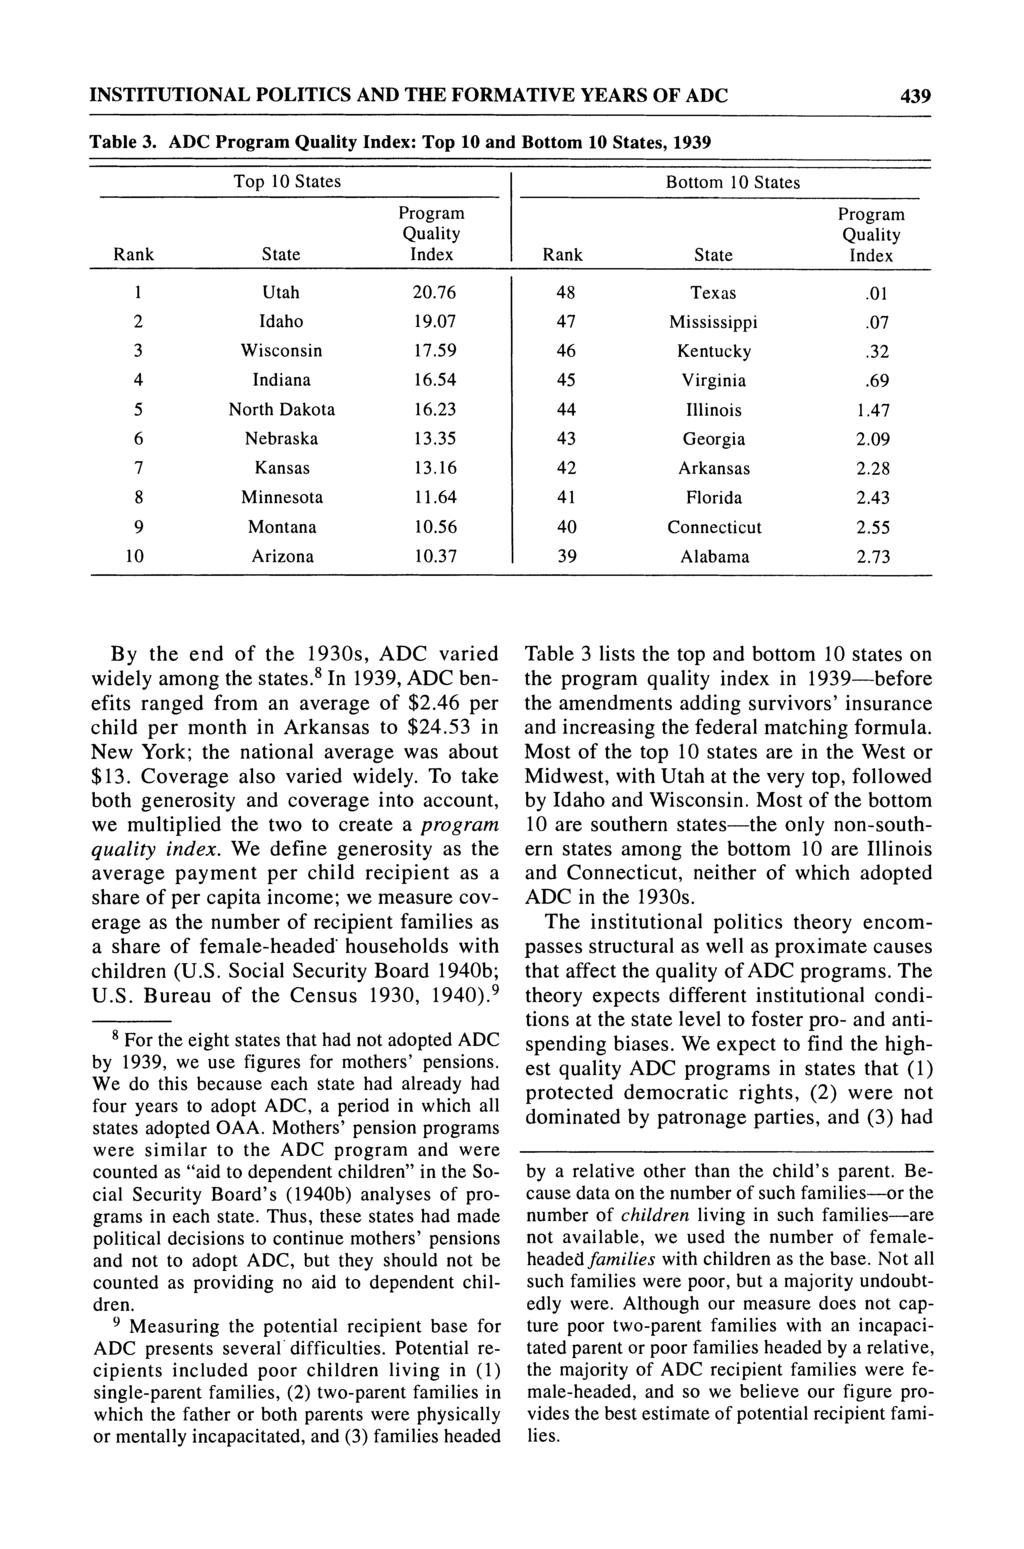 INSTITUTIONAL POLITICS AND THE FORMATIVE YEARS OF ADC 439 Table 3. ADC Program Quality Index: Top 10 and Bottom 10 States, 1939 Top 10 States Program Quality Rank State Index 1 Utah 20.